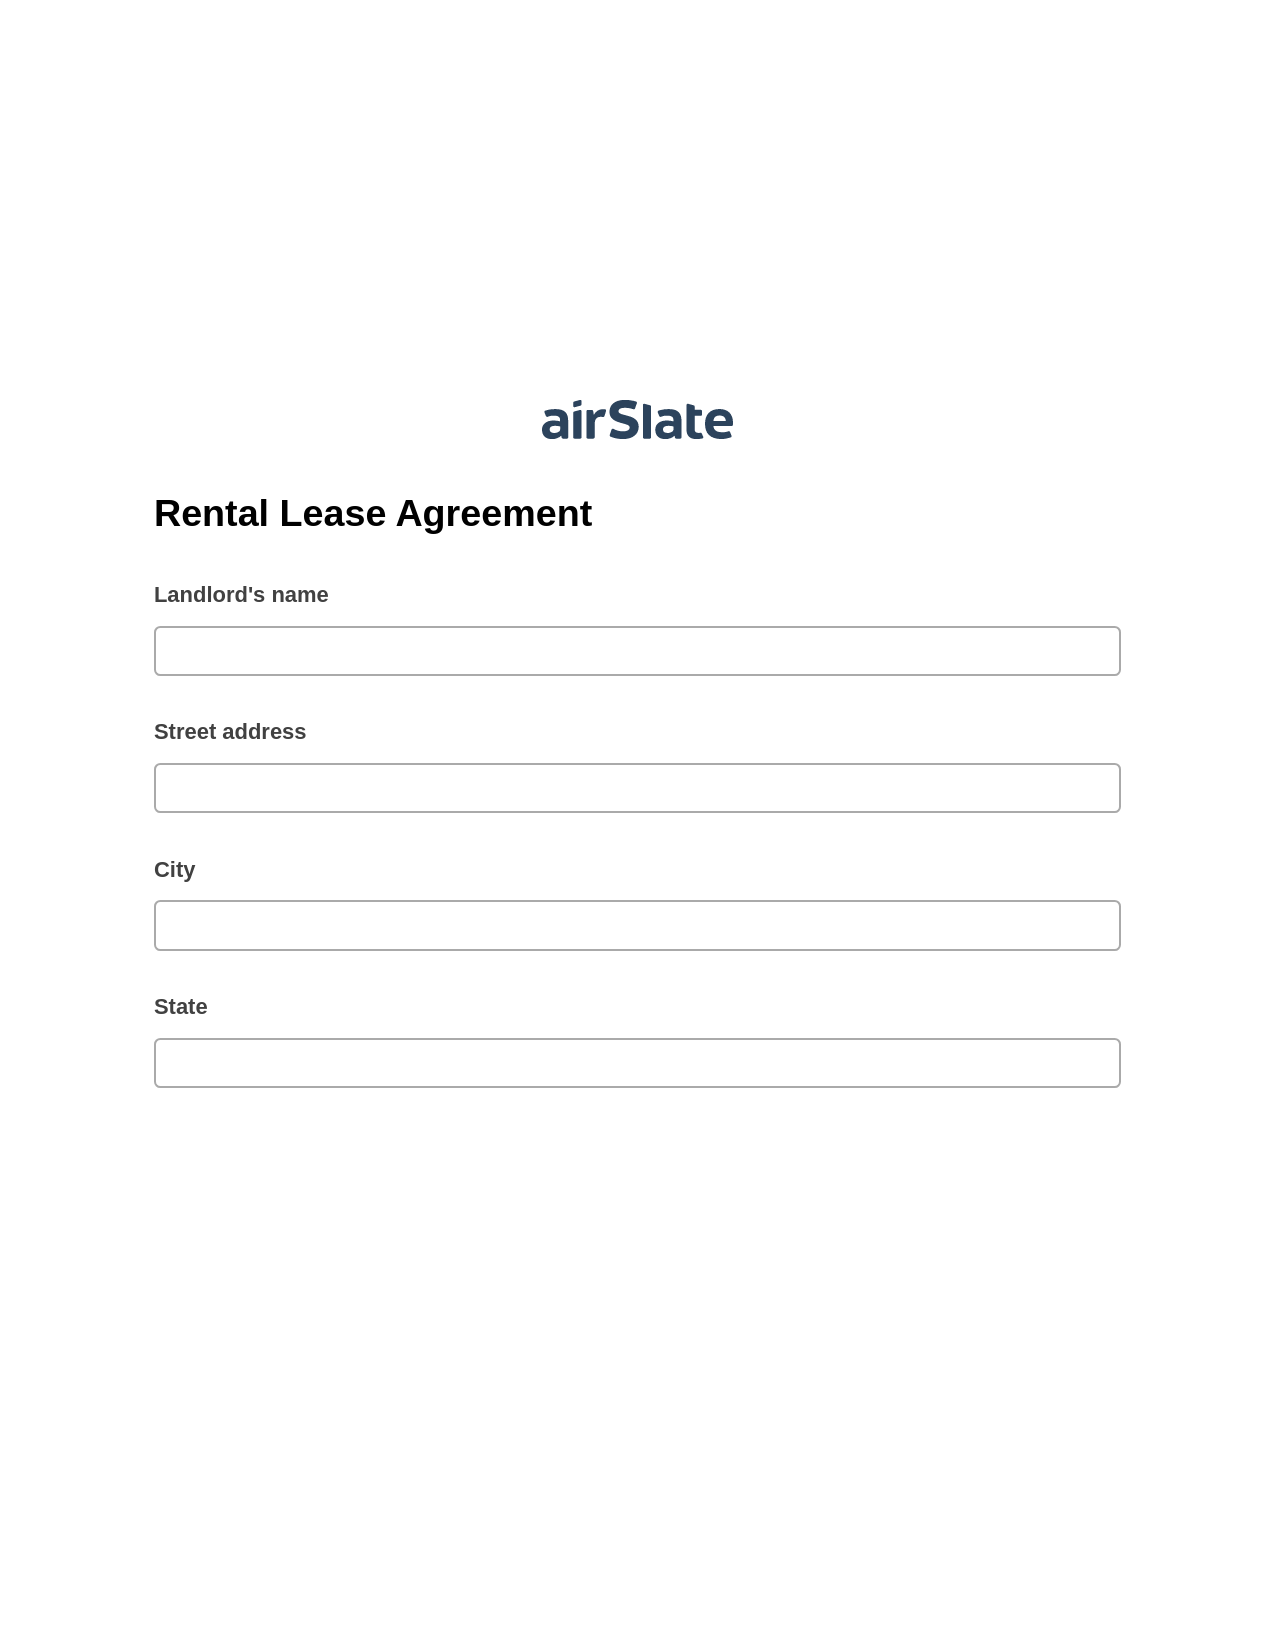 Multirole Rental Lease Agreement Pre-fill from MySQL Dropdown Options Bot, System Bot - Create a Slate in another Flow, Export to NetSuite Record Bot